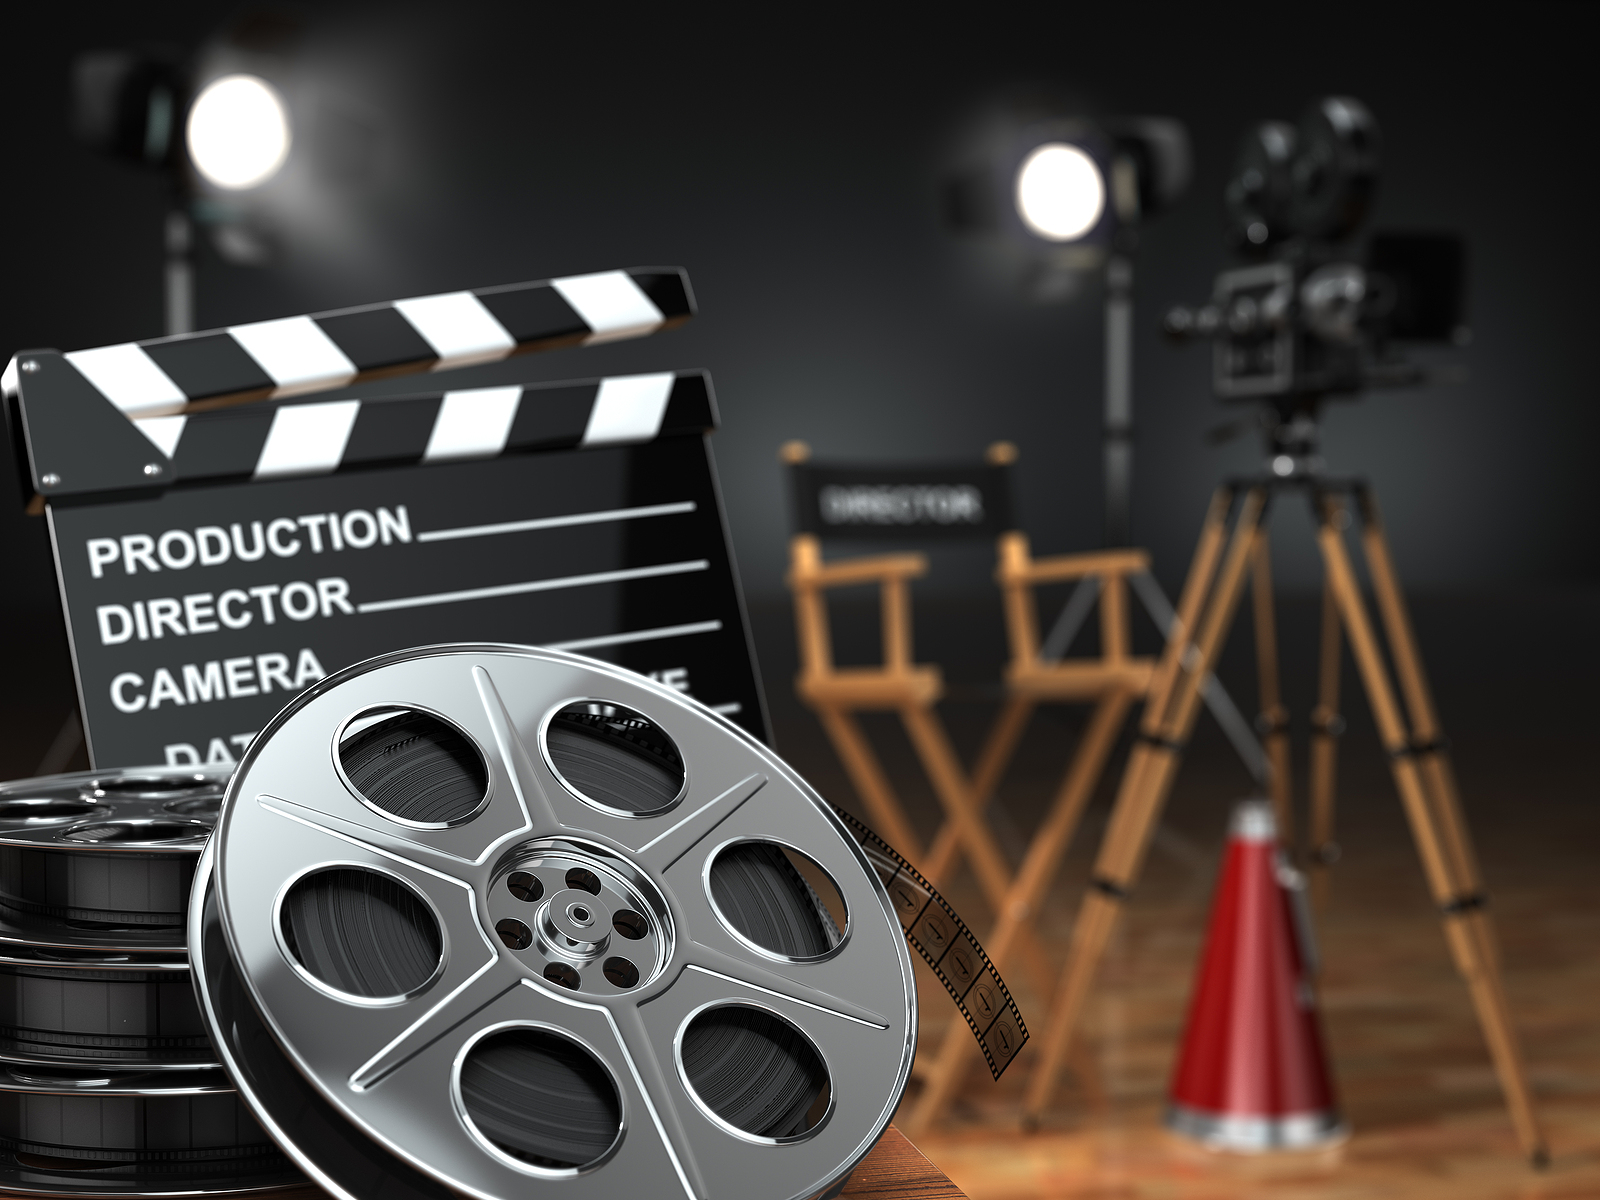 REVIVE.ORG - Background image with directors chair, clapperboard, and film reels